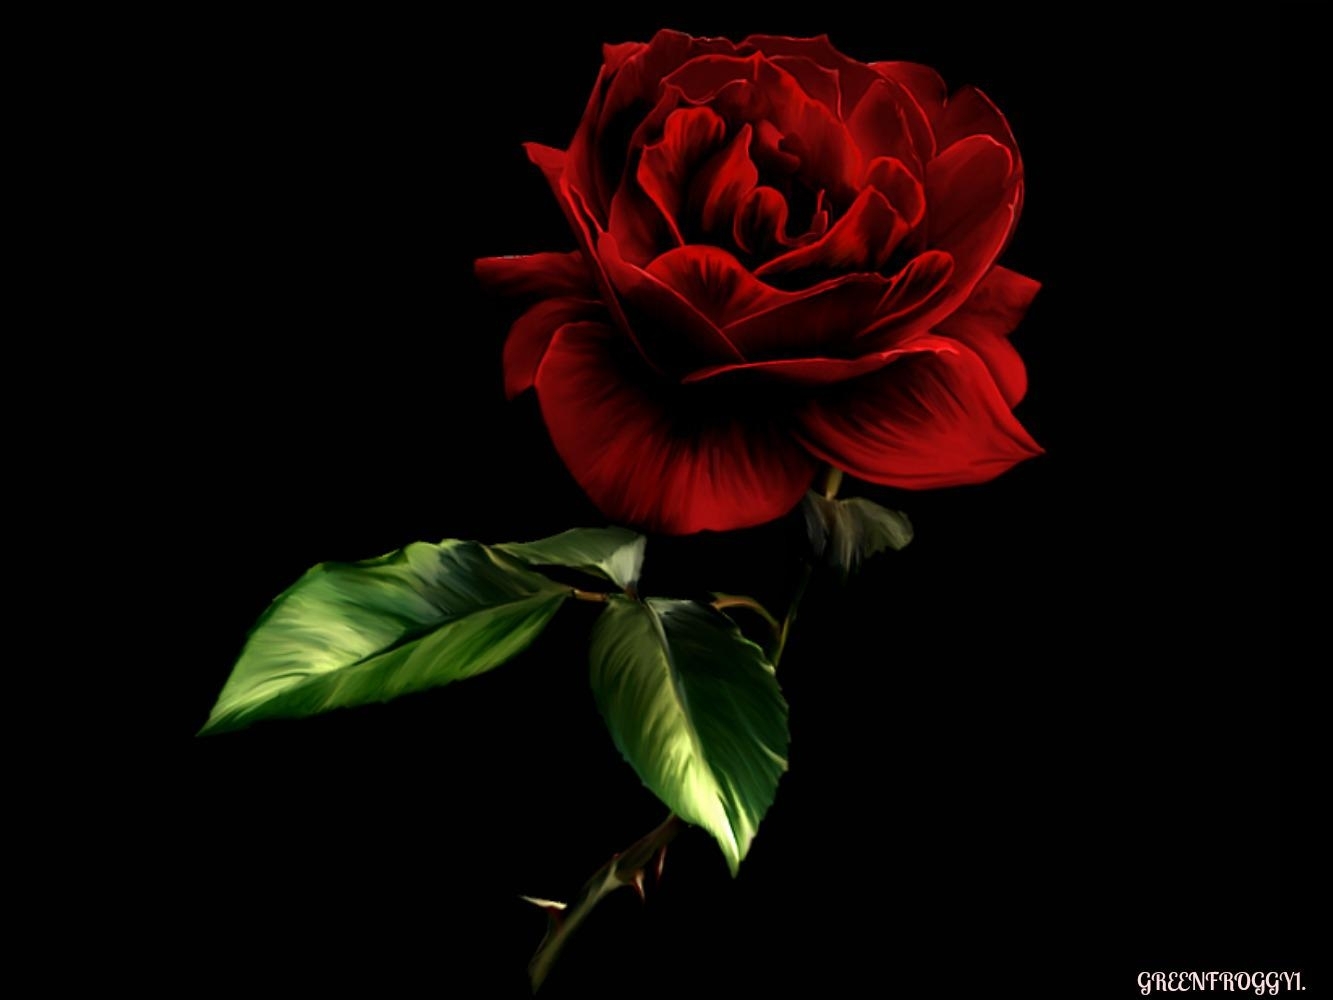 10 Best And Latest Red Roses With Black Background for Desktop Computer wit...